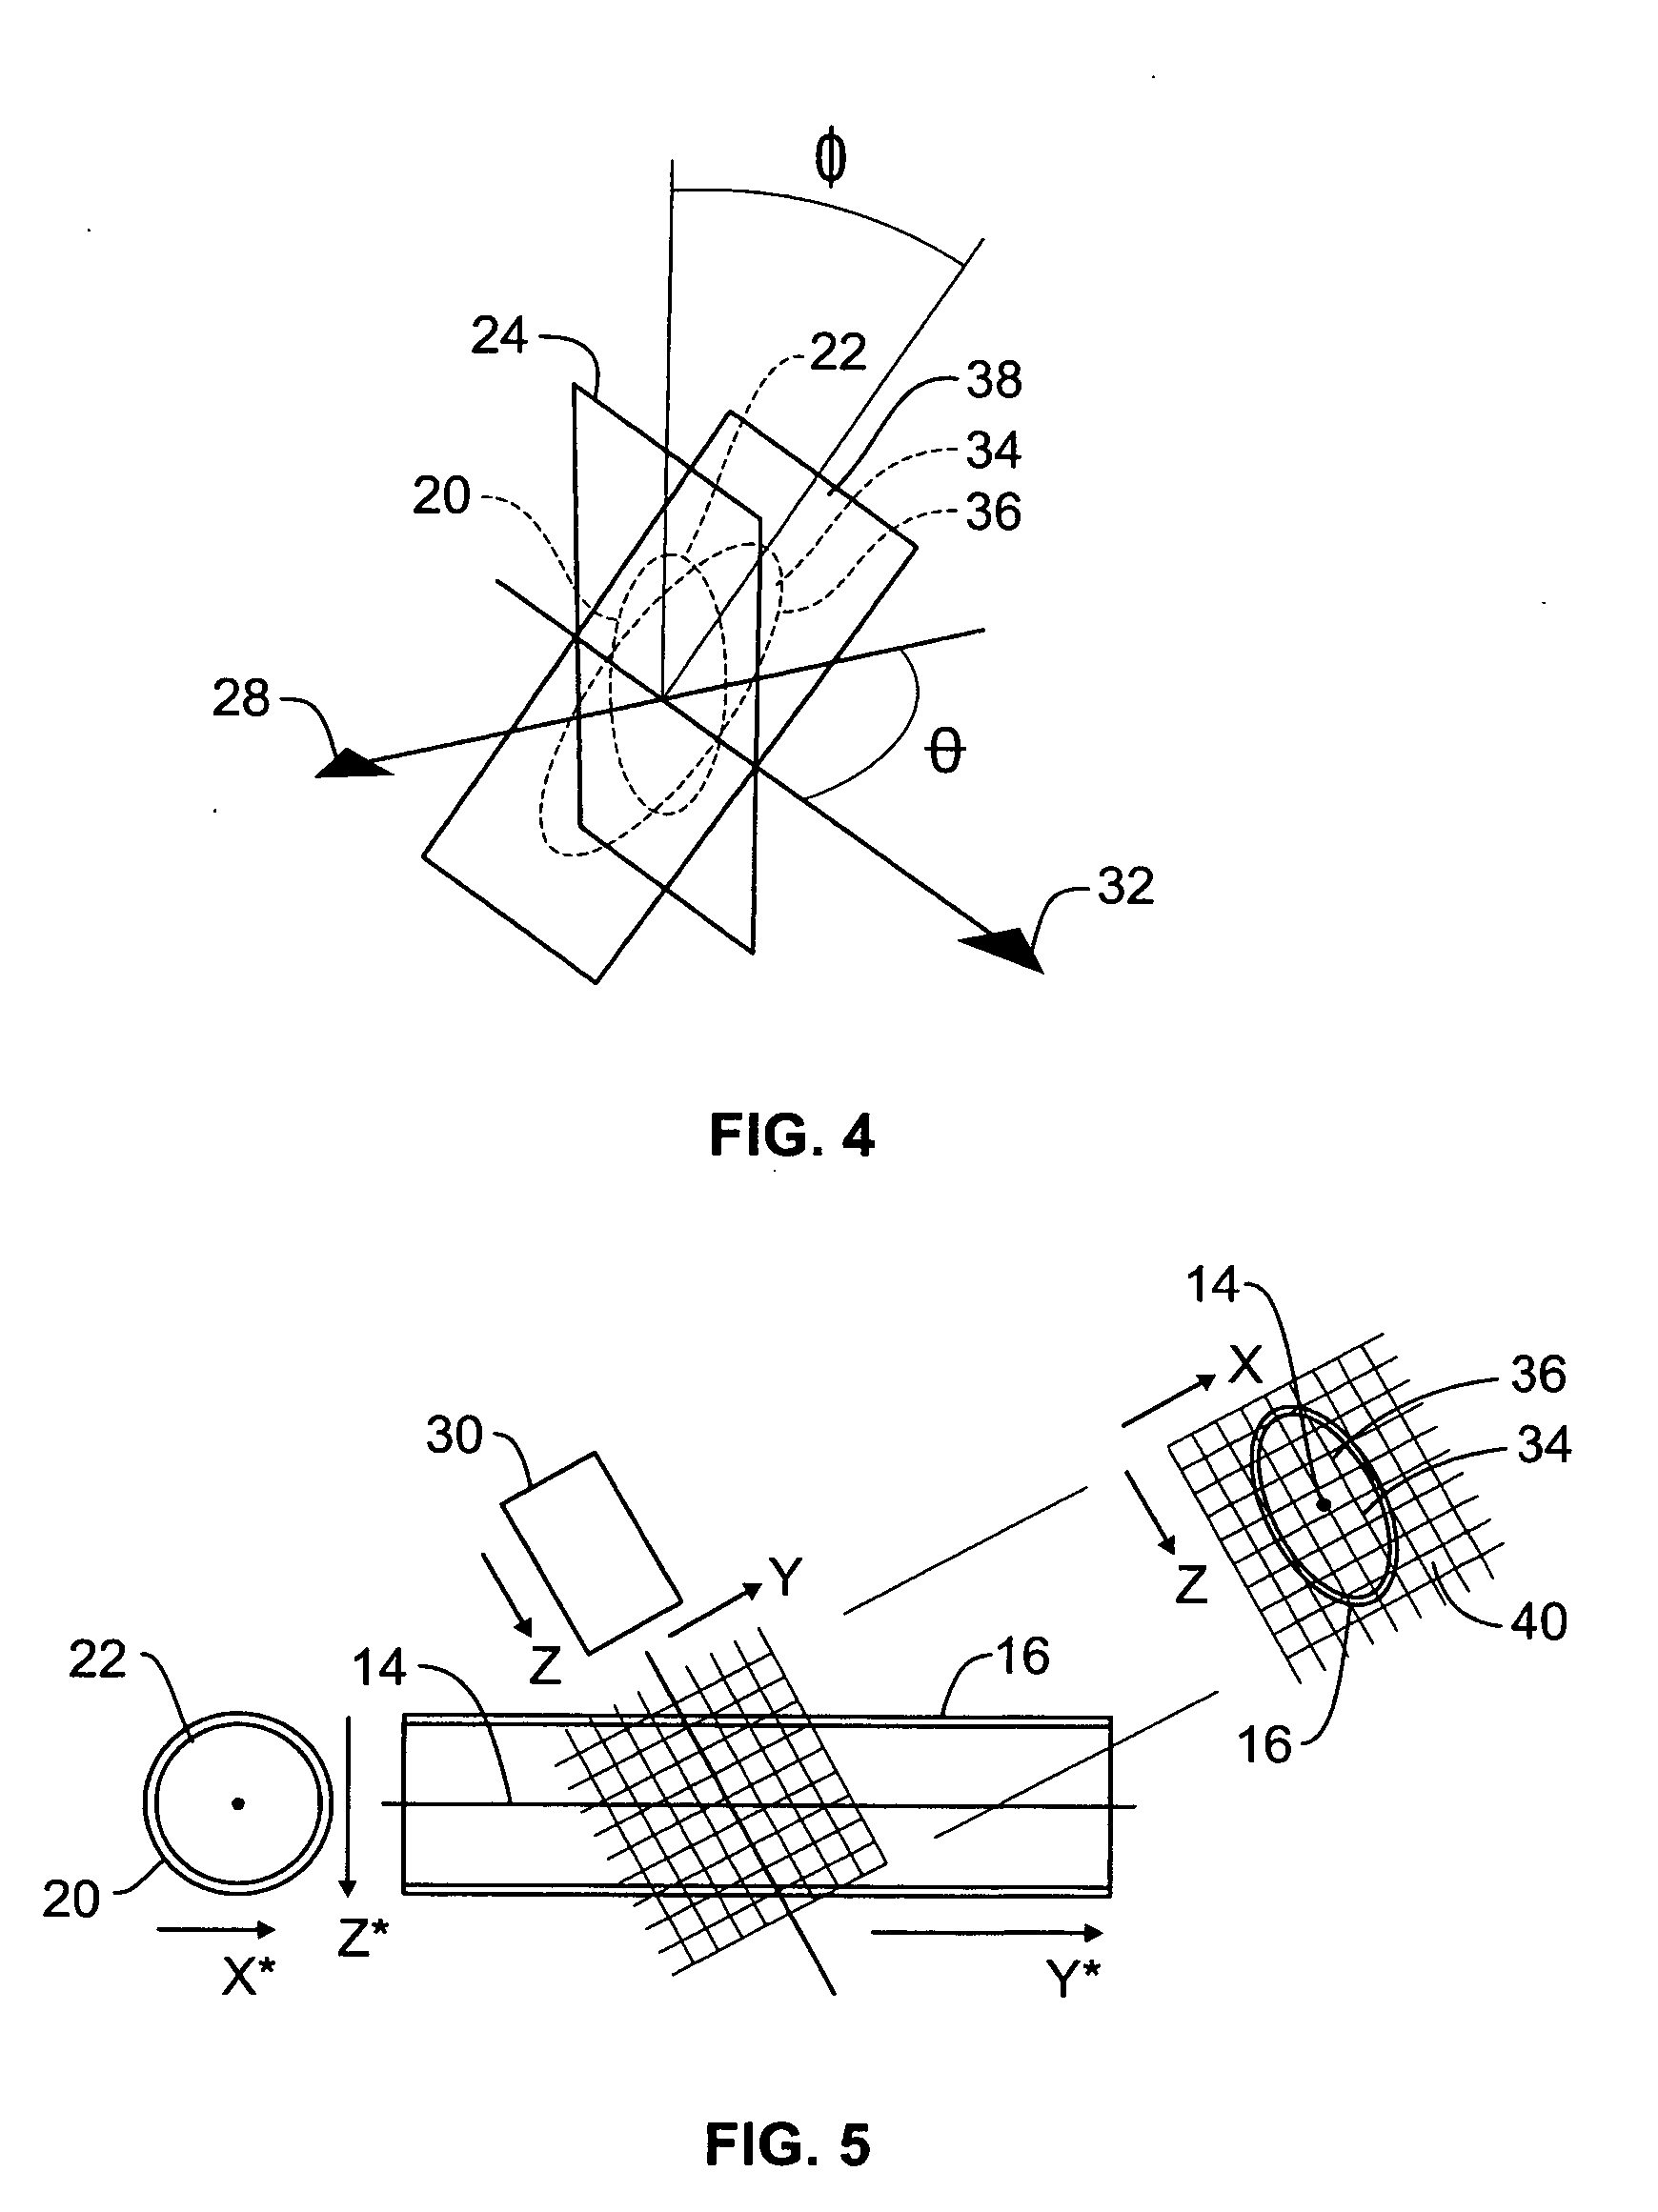 Method and apparatus for determining an ultrasound fluid flow centerline